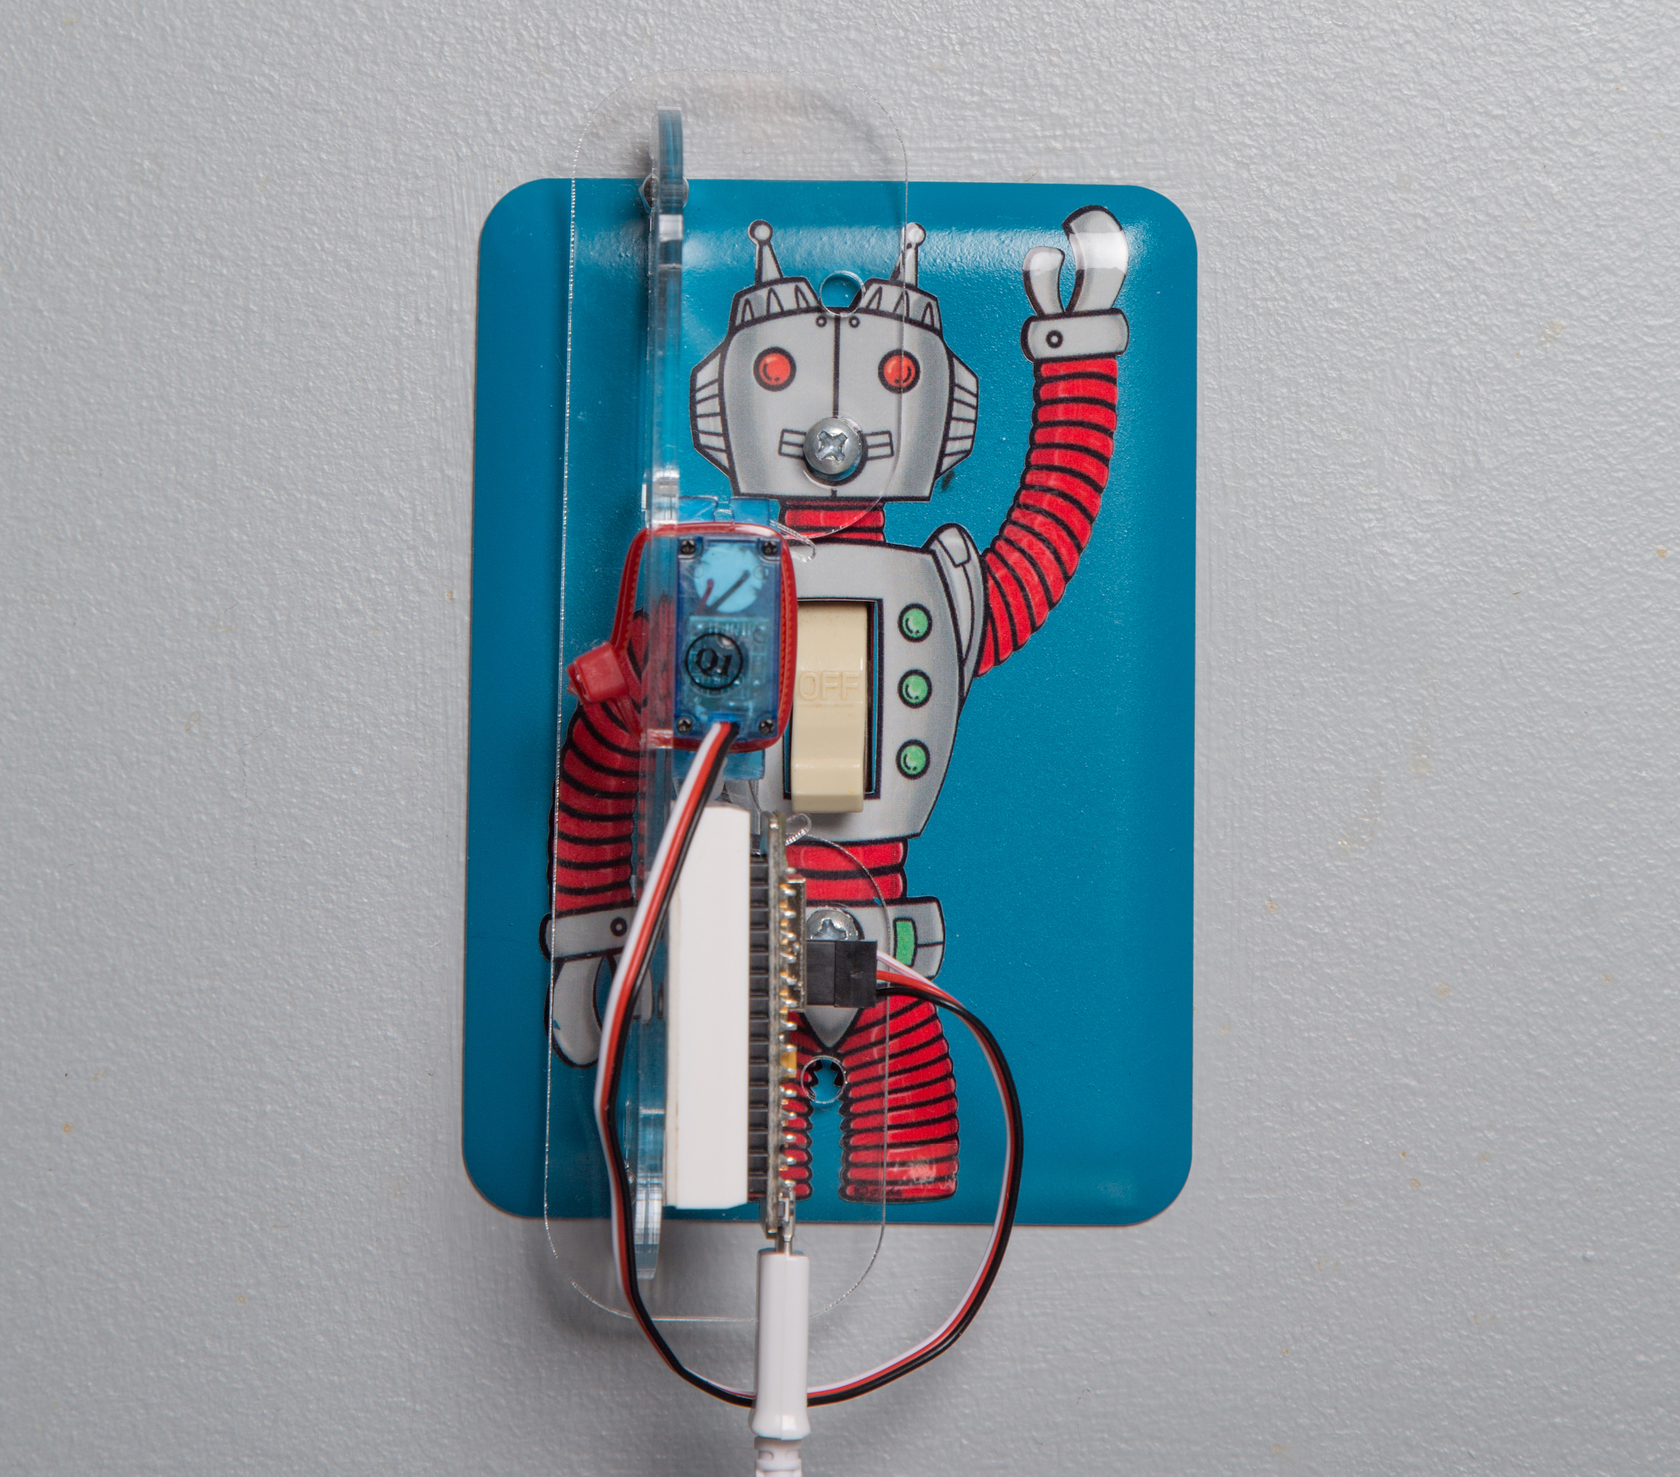 Make a Wi-Fi Enabled Light Switch Turner Onner